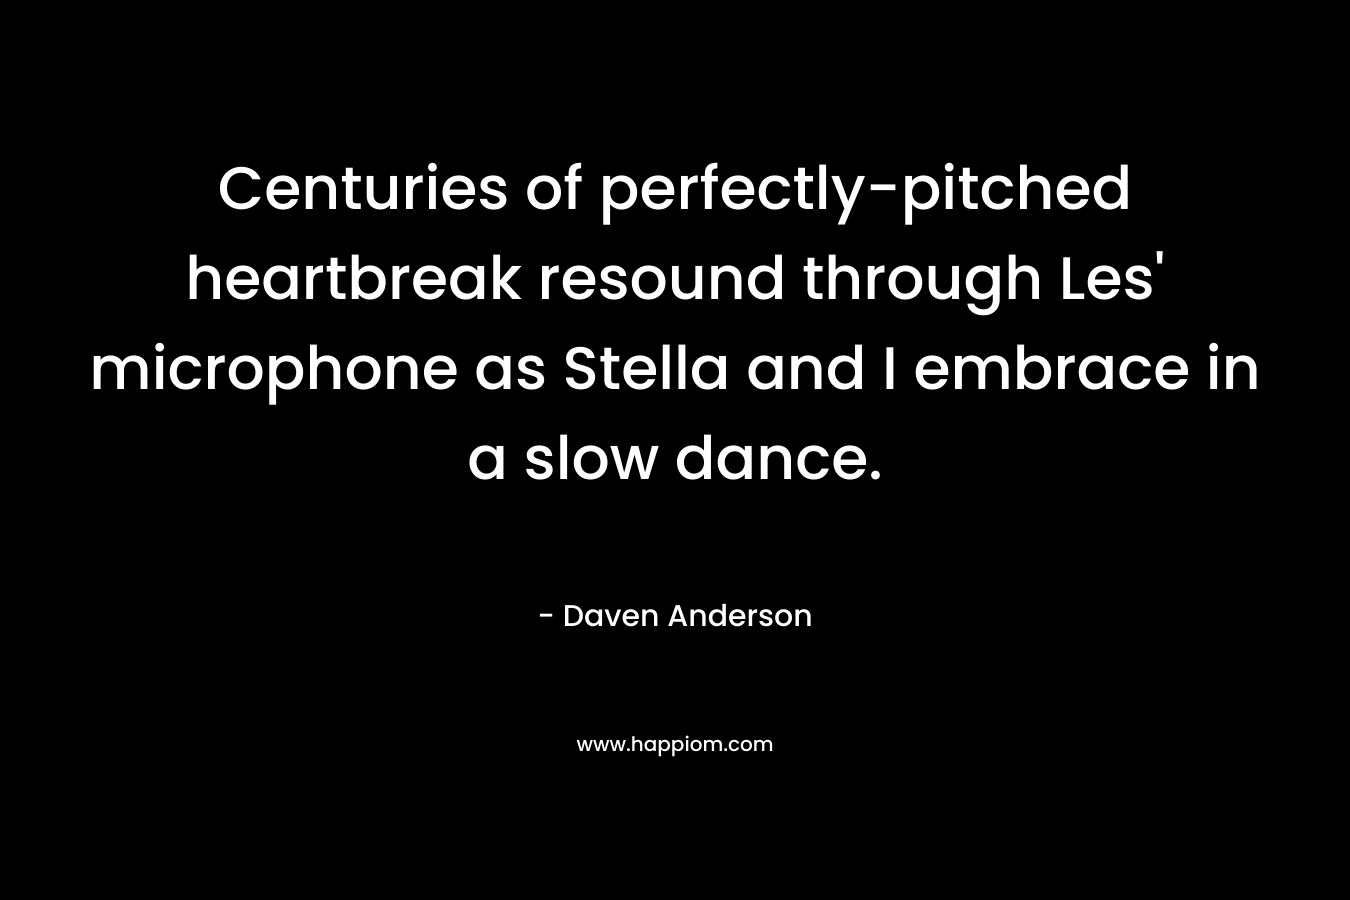 Centuries of perfectly-pitched heartbreak resound through Les’ microphone as Stella and I embrace in a slow dance. – Daven Anderson